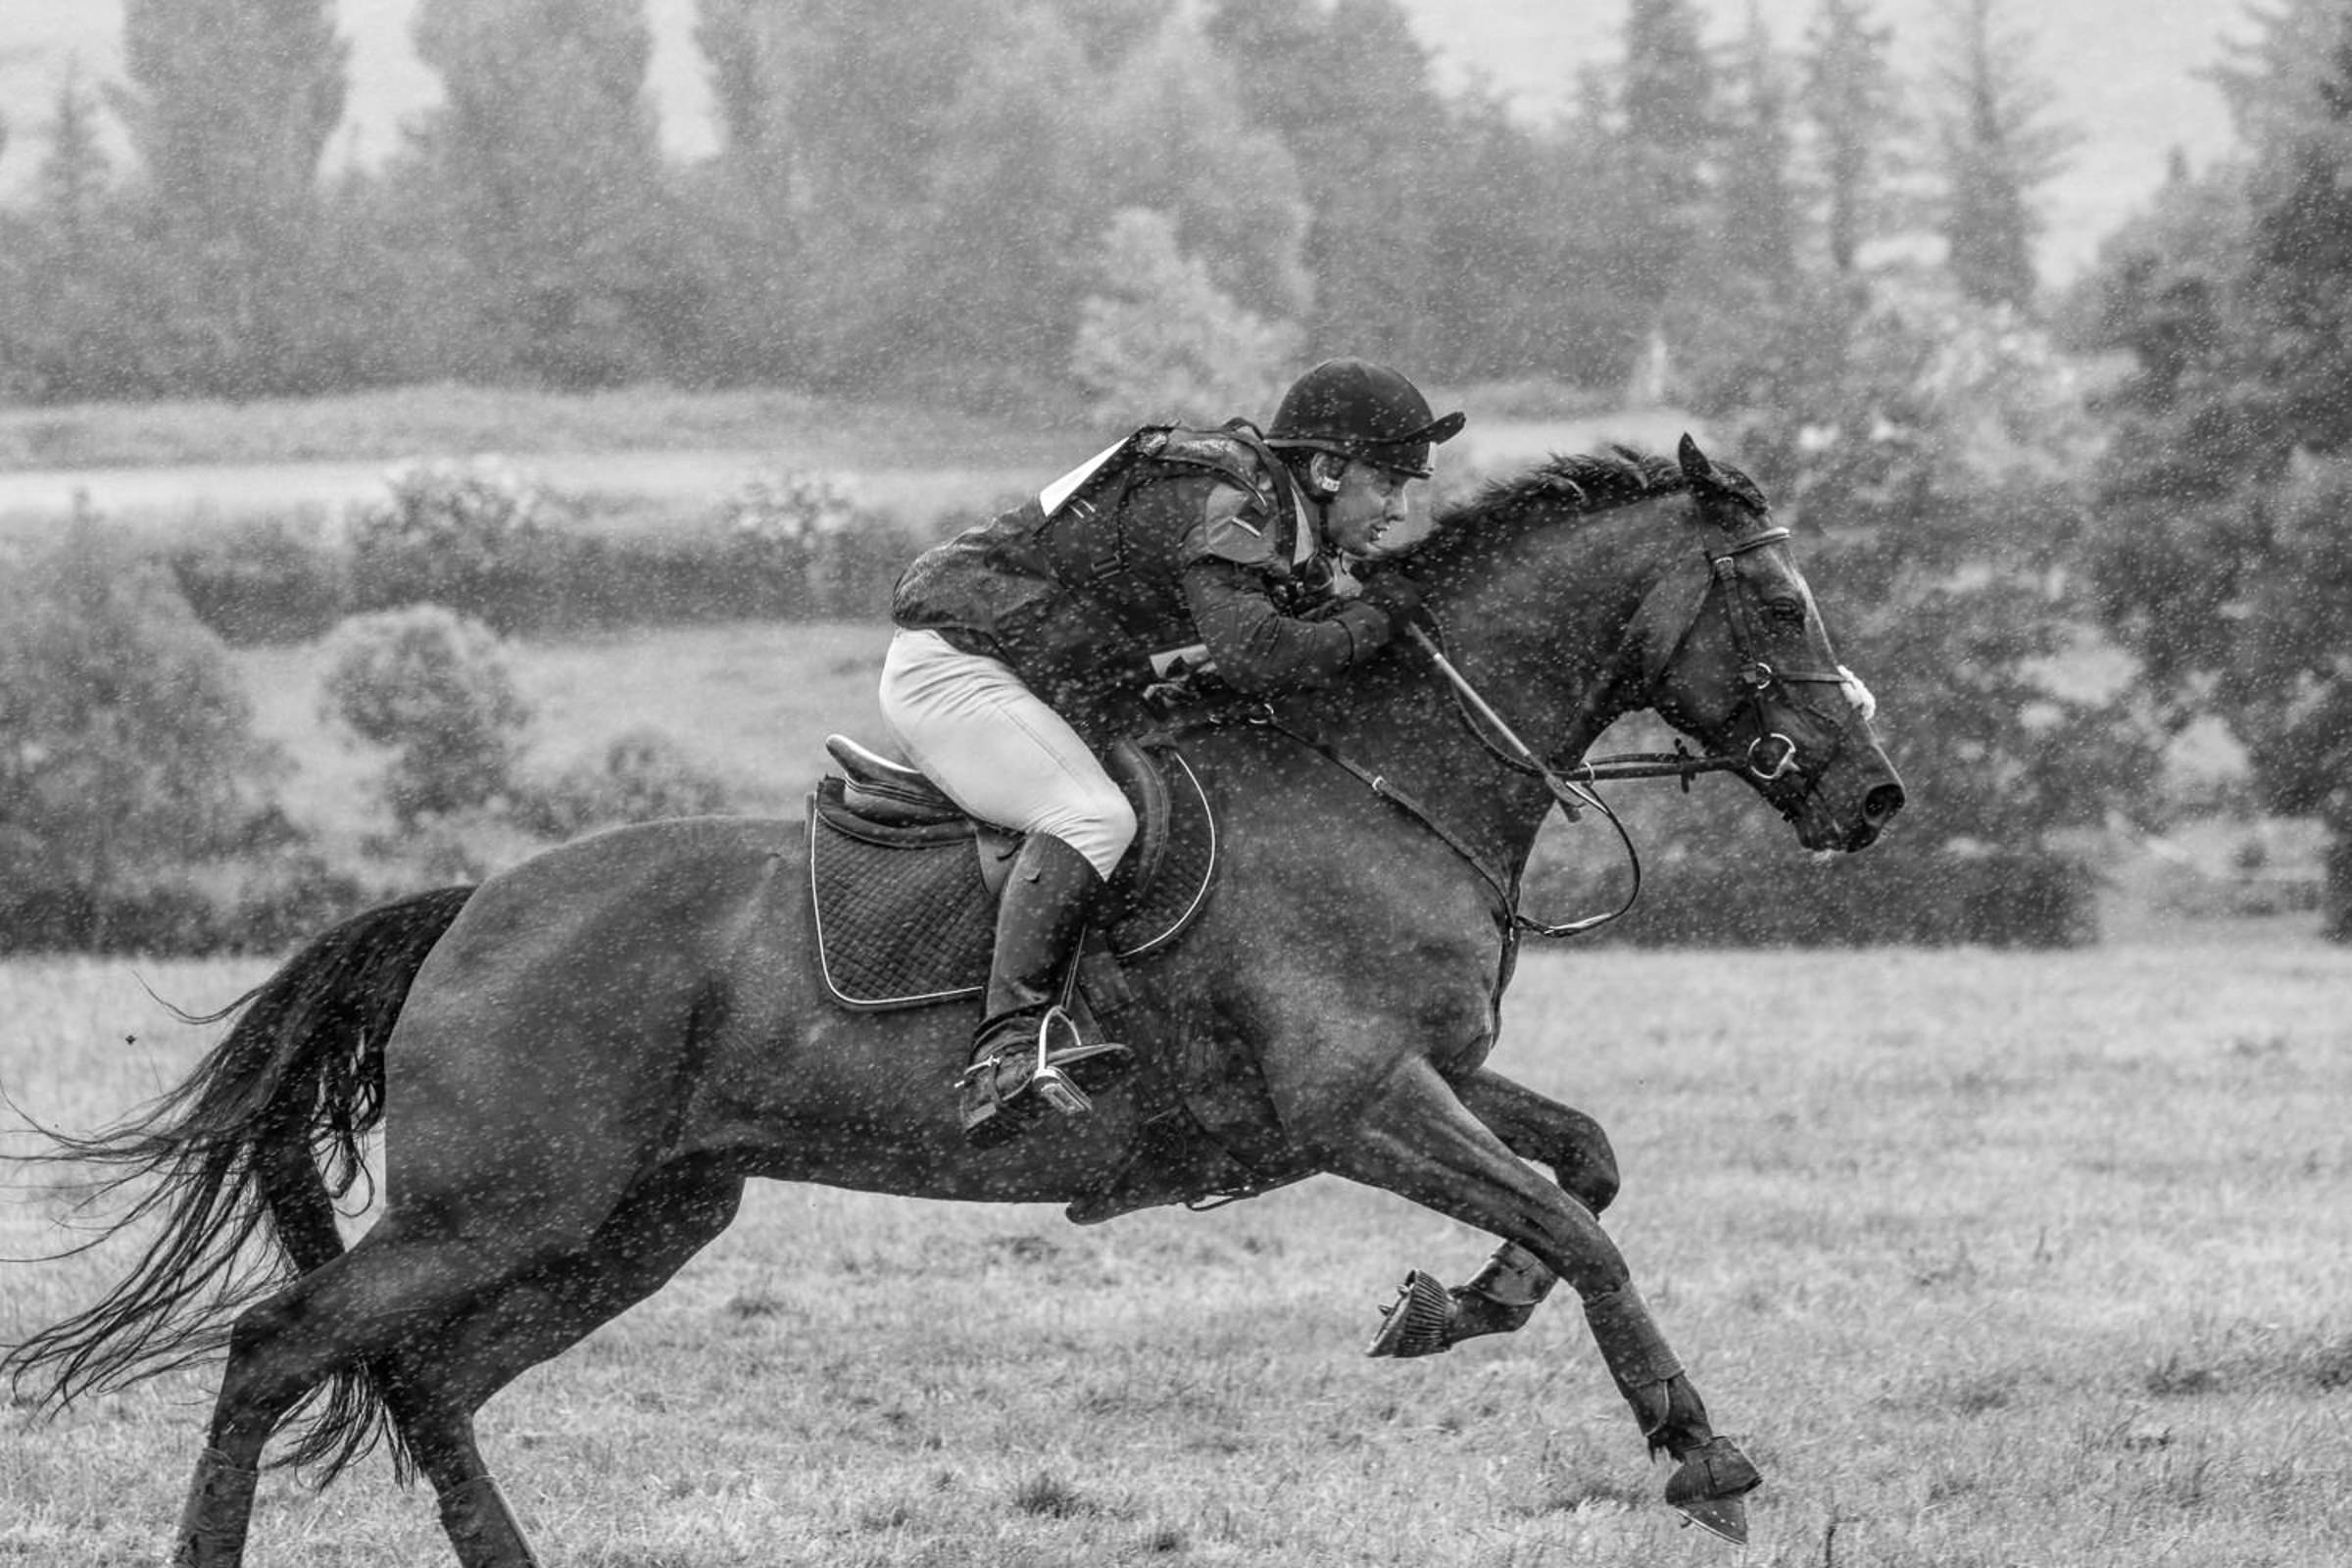 black and white photo pf a horse and rider galloping in the rain